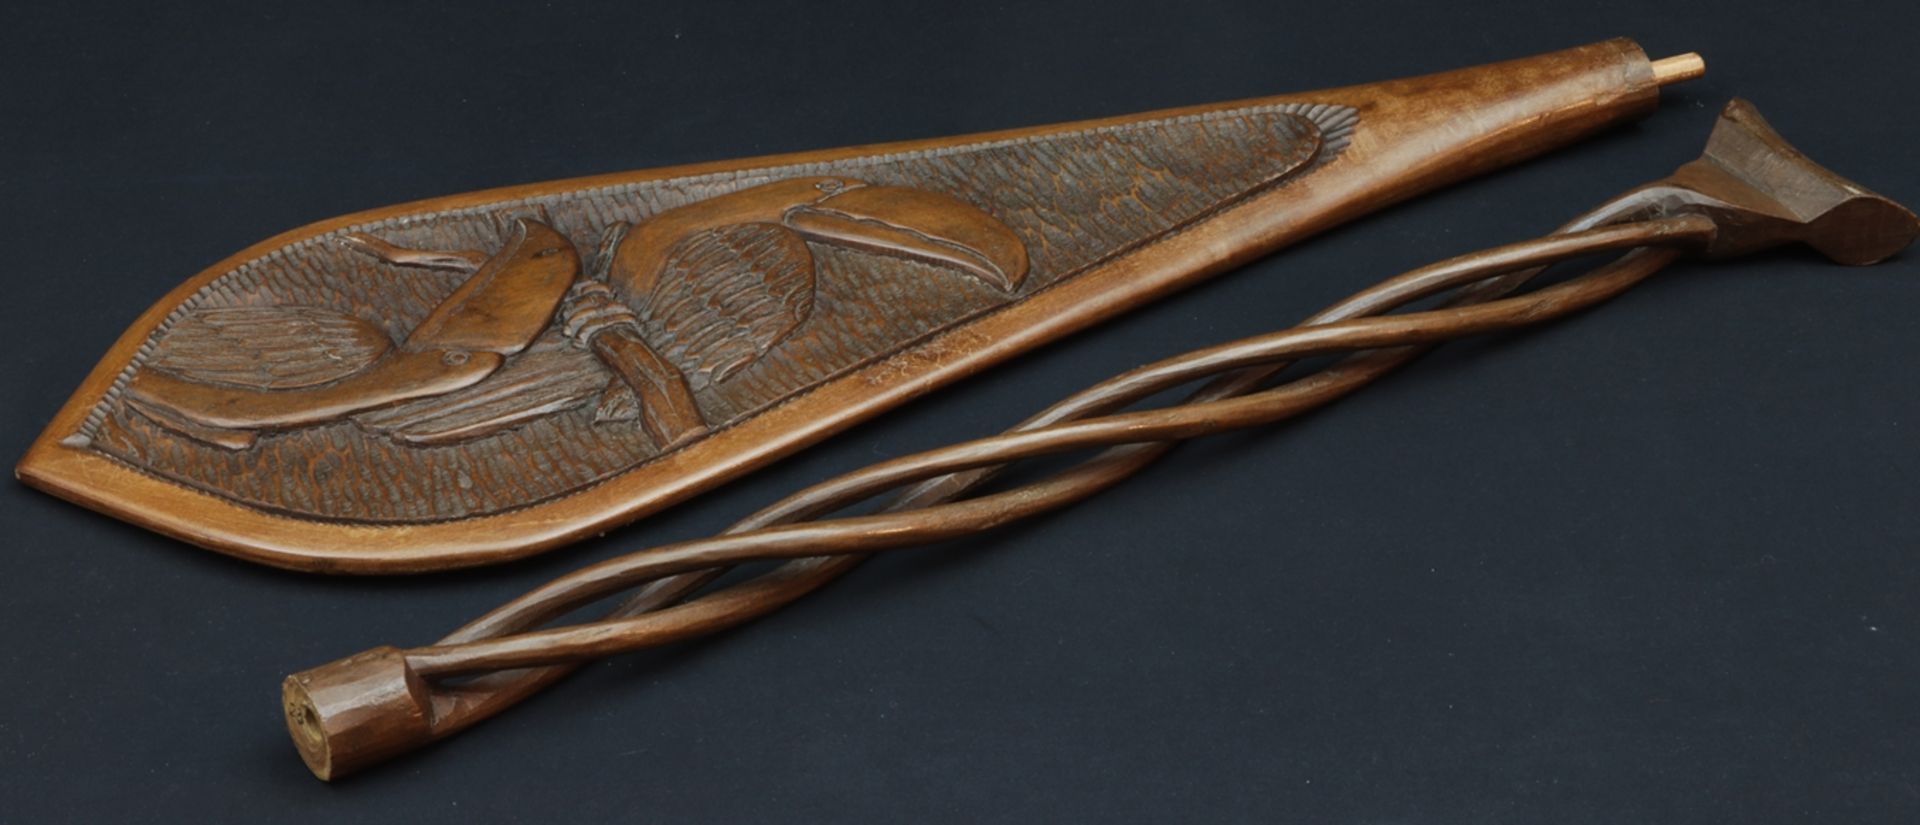 Ornamental paddle, Asia, middle to second half of the 20th century - Image 3 of 4